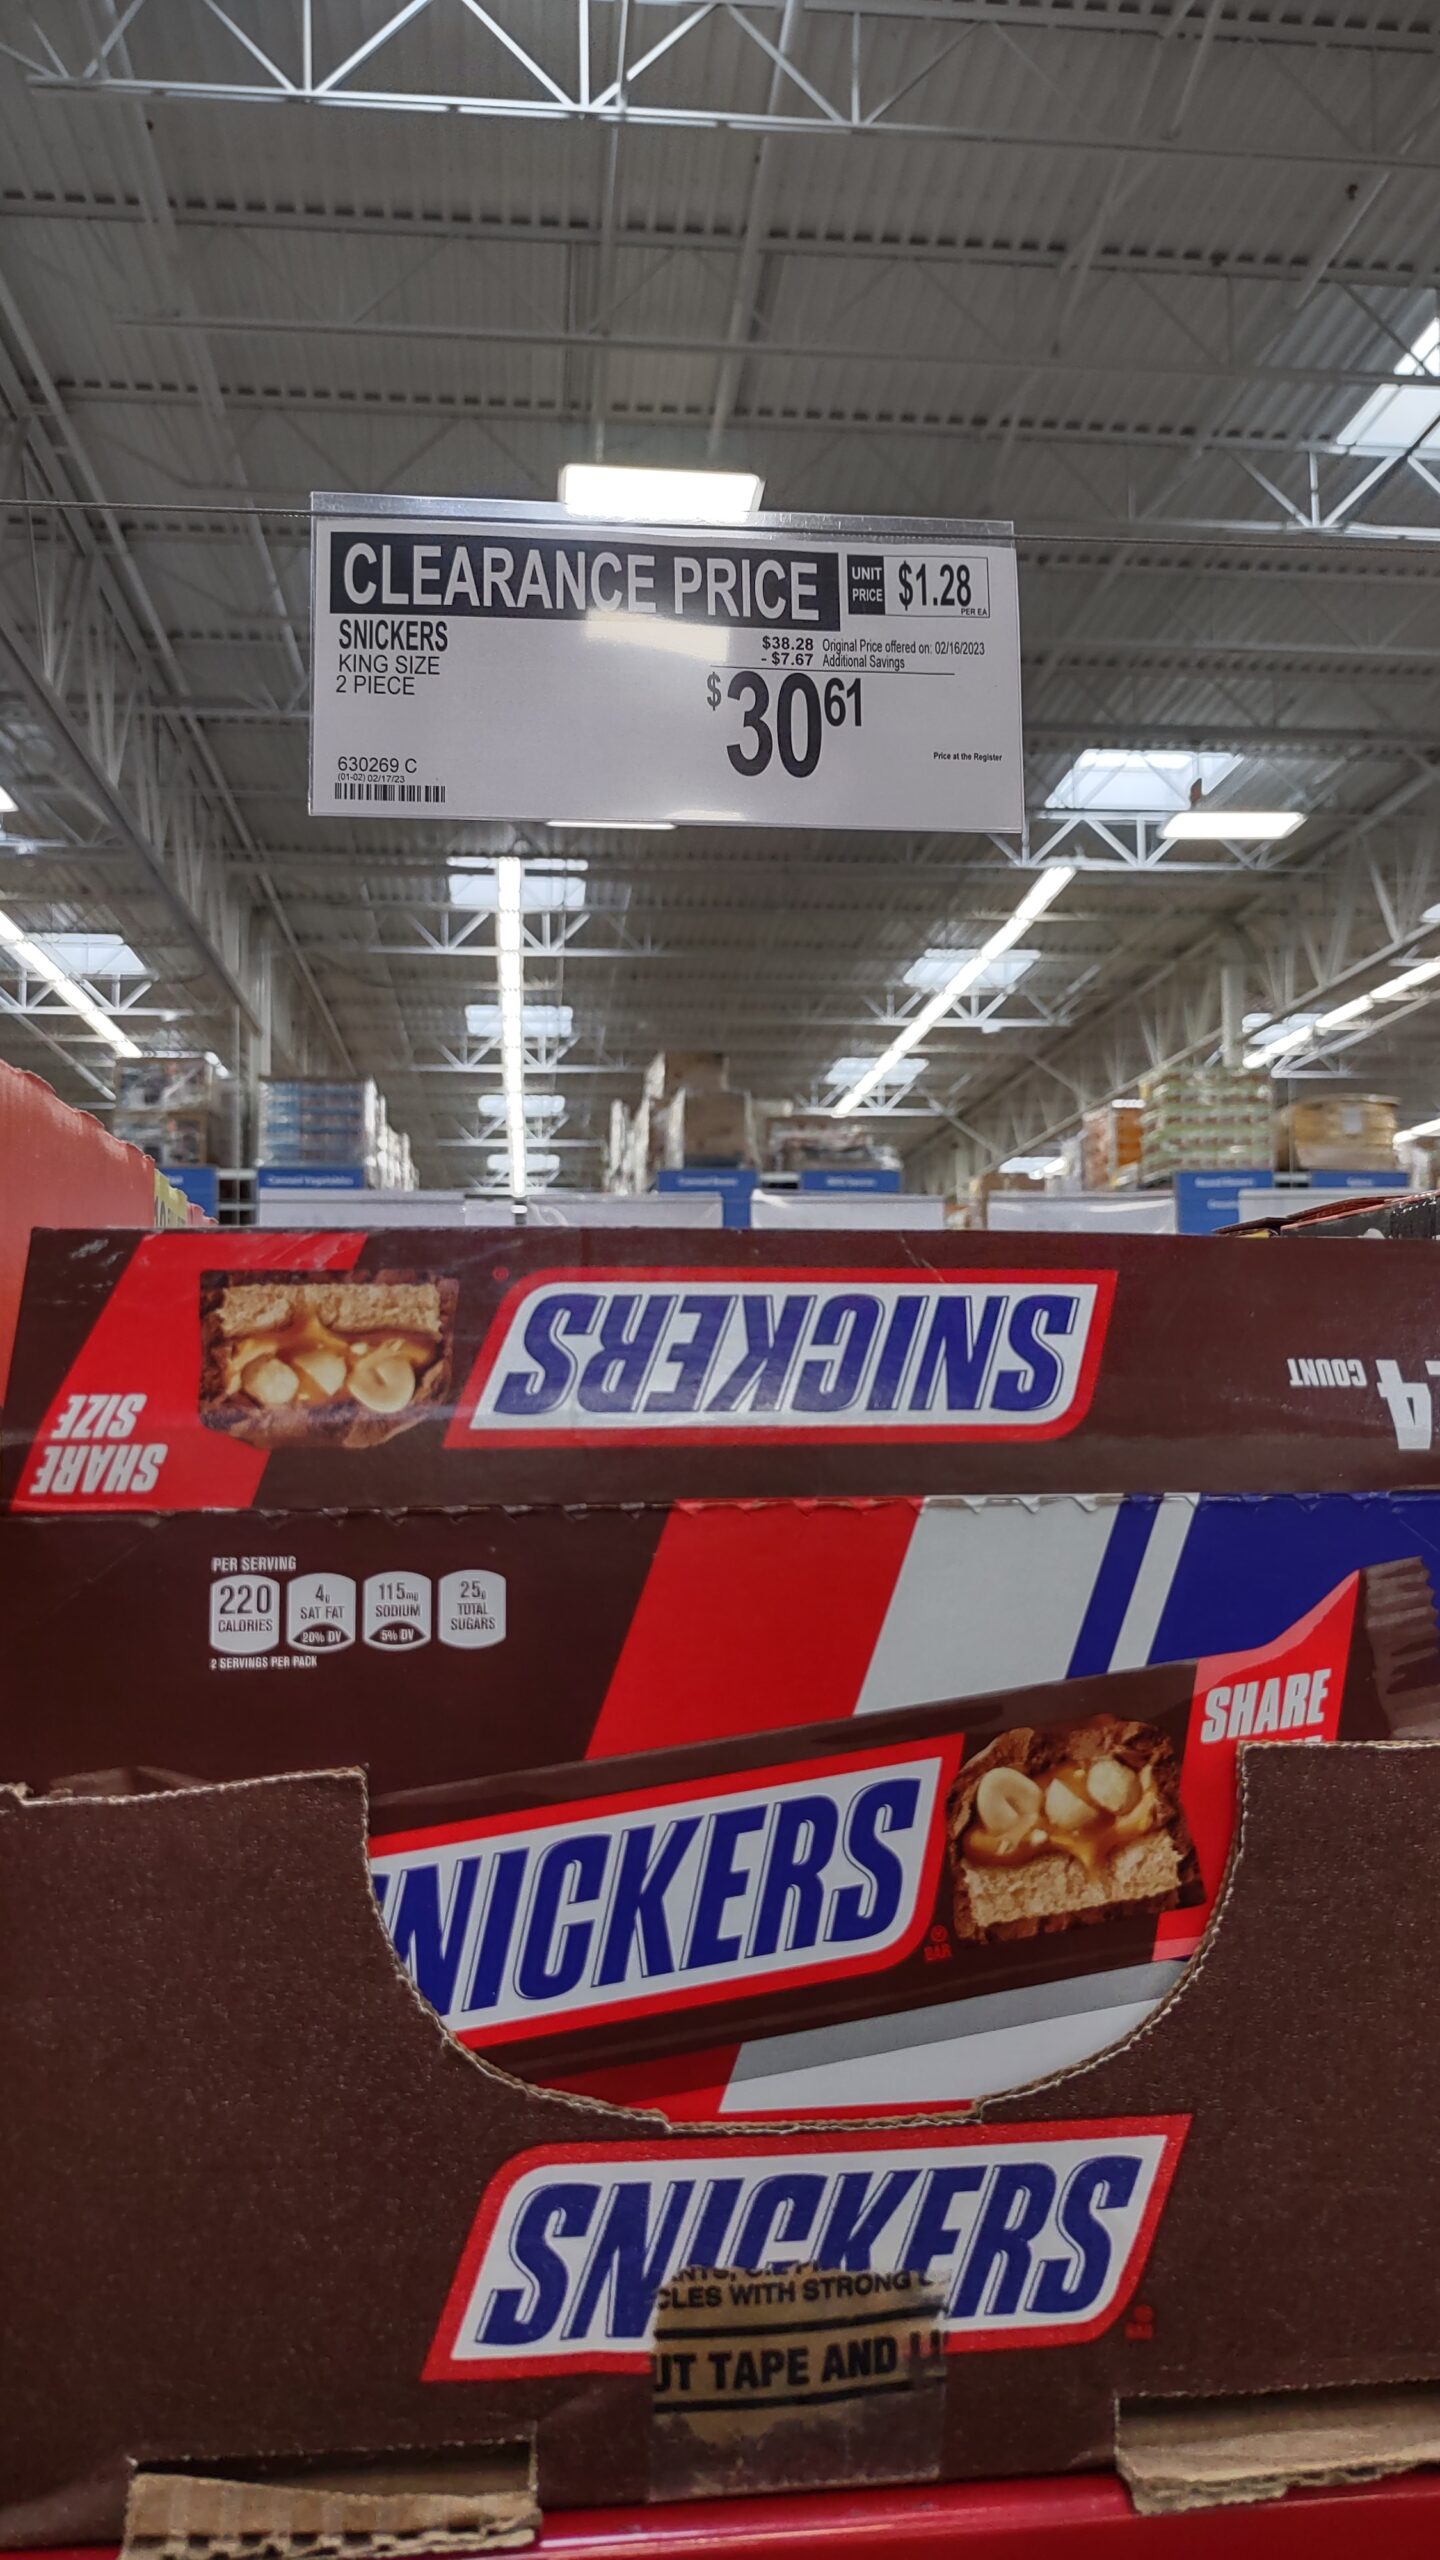 Clearance Snickers King Size 24ct $30.98 at Sam’s